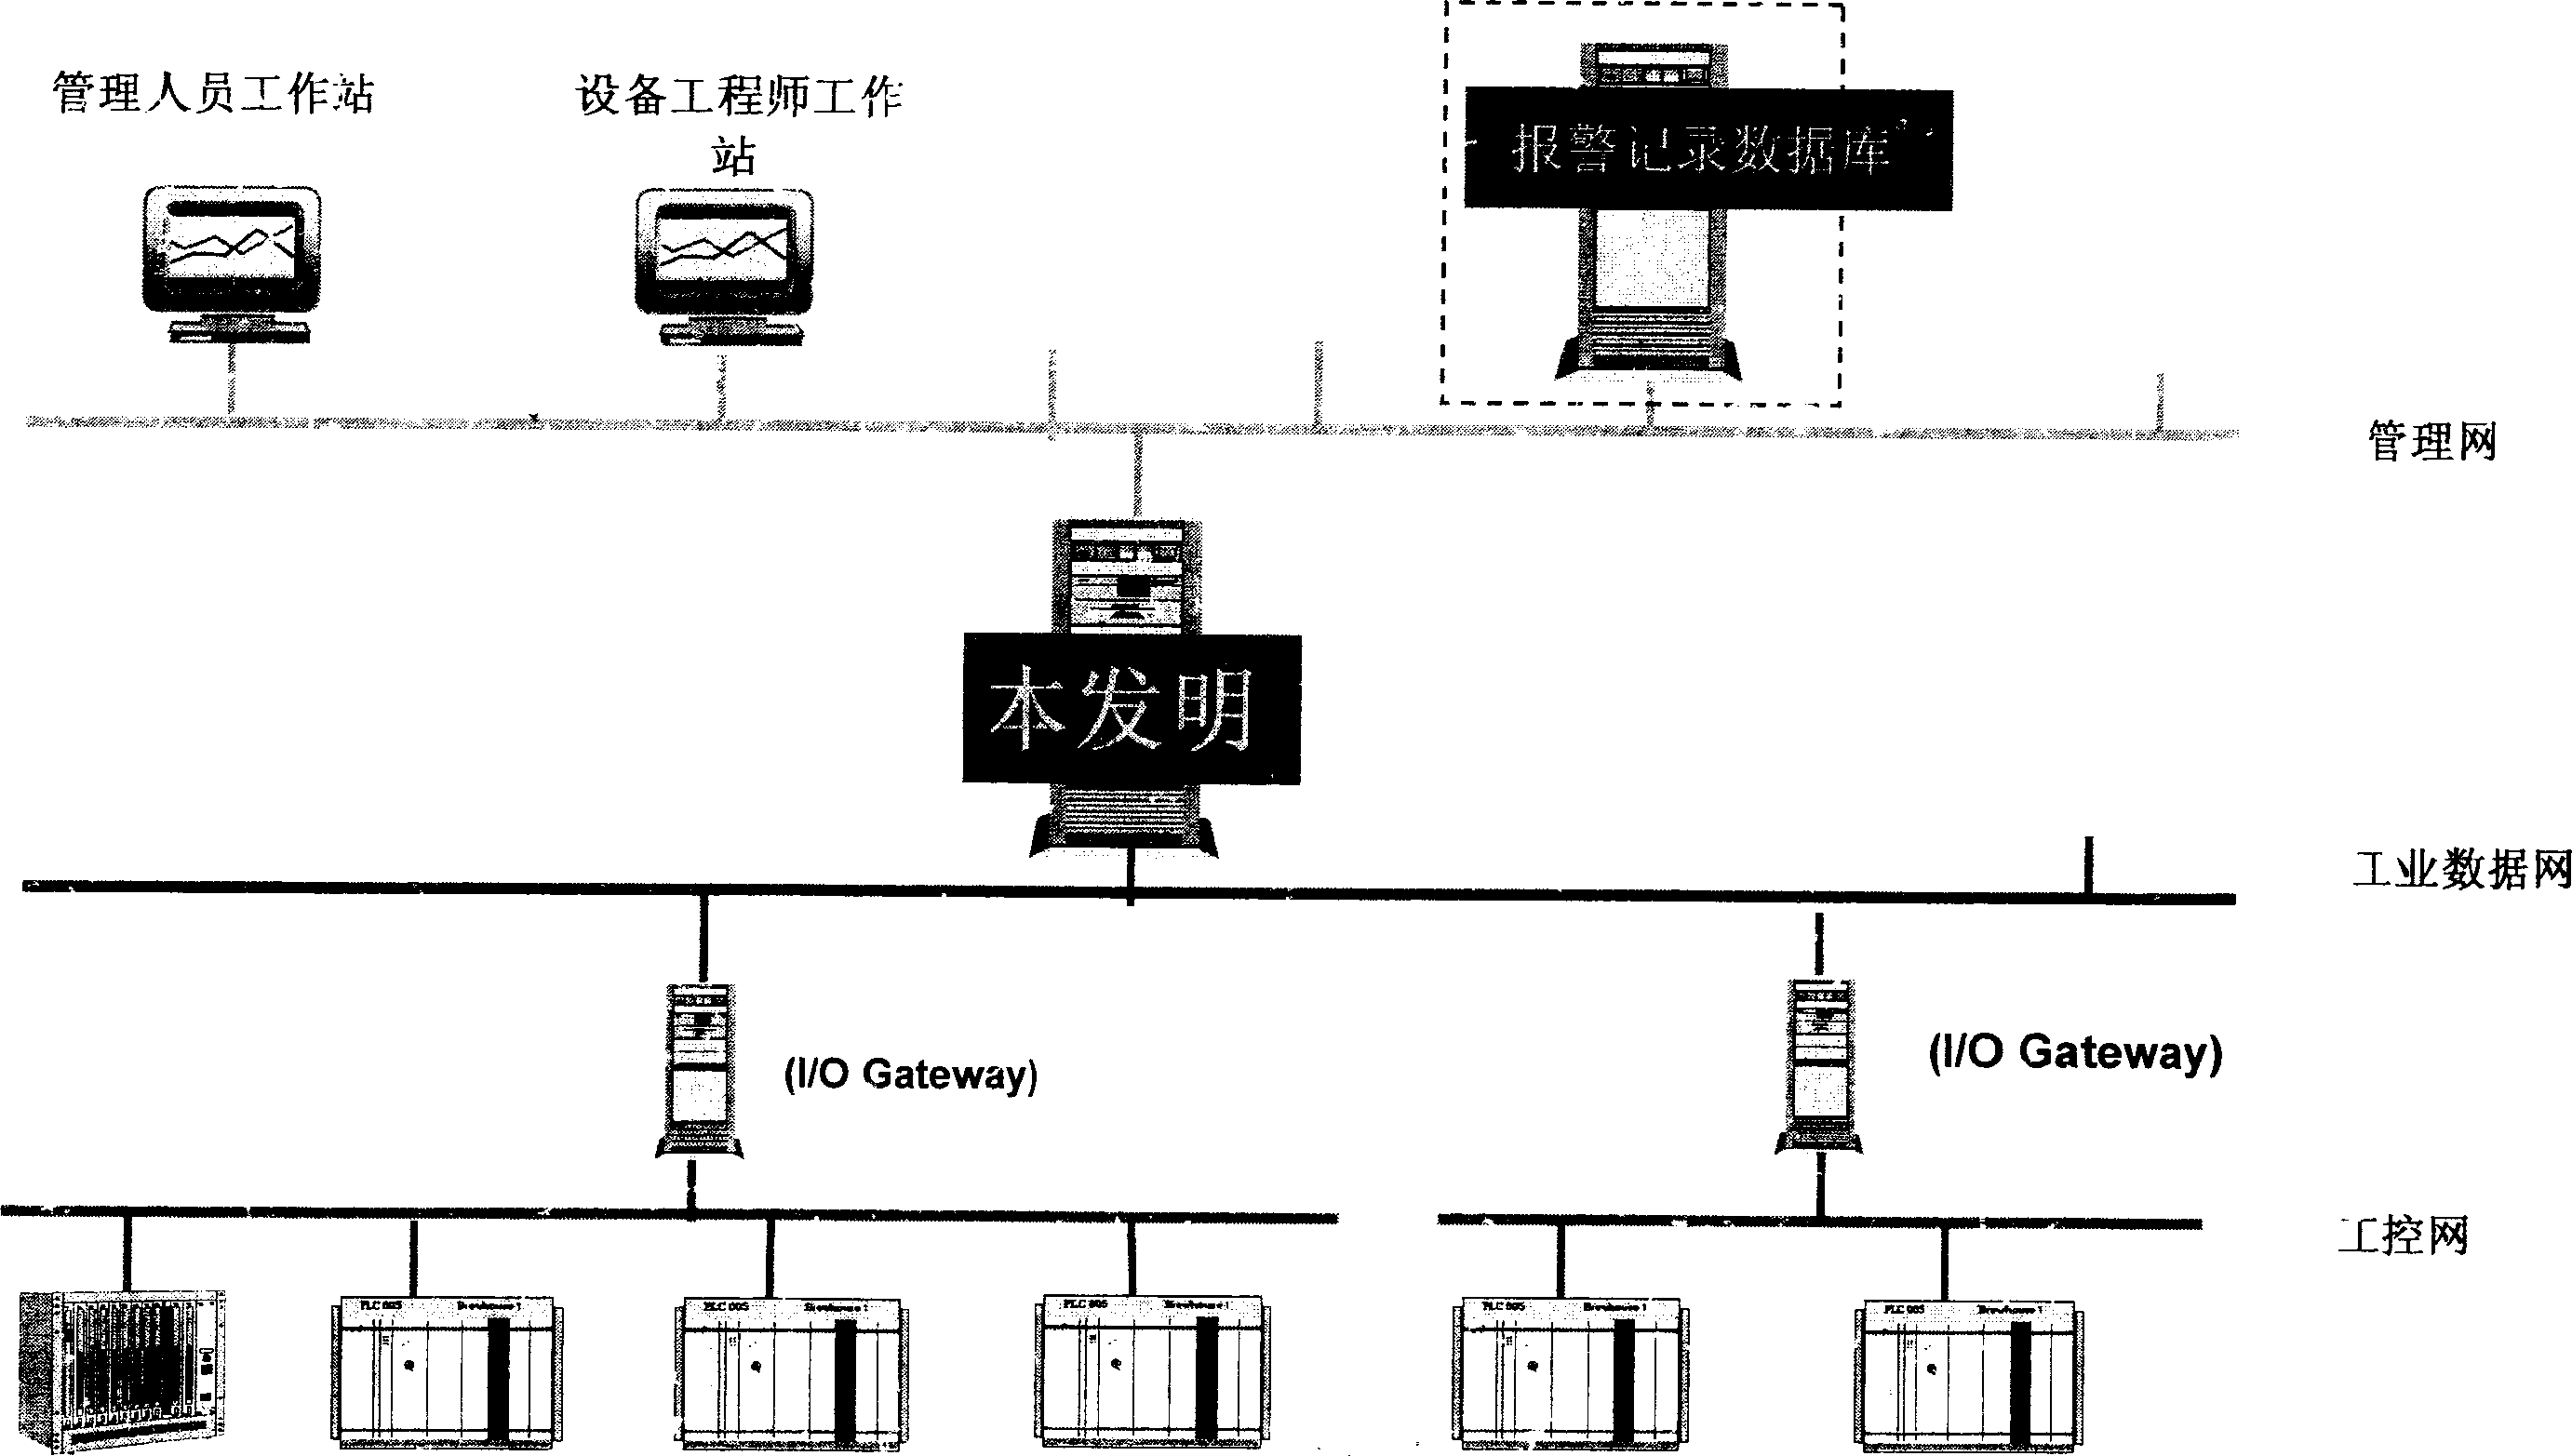 Method and apparatus for nuclear power station equipment risk evaluation by computer